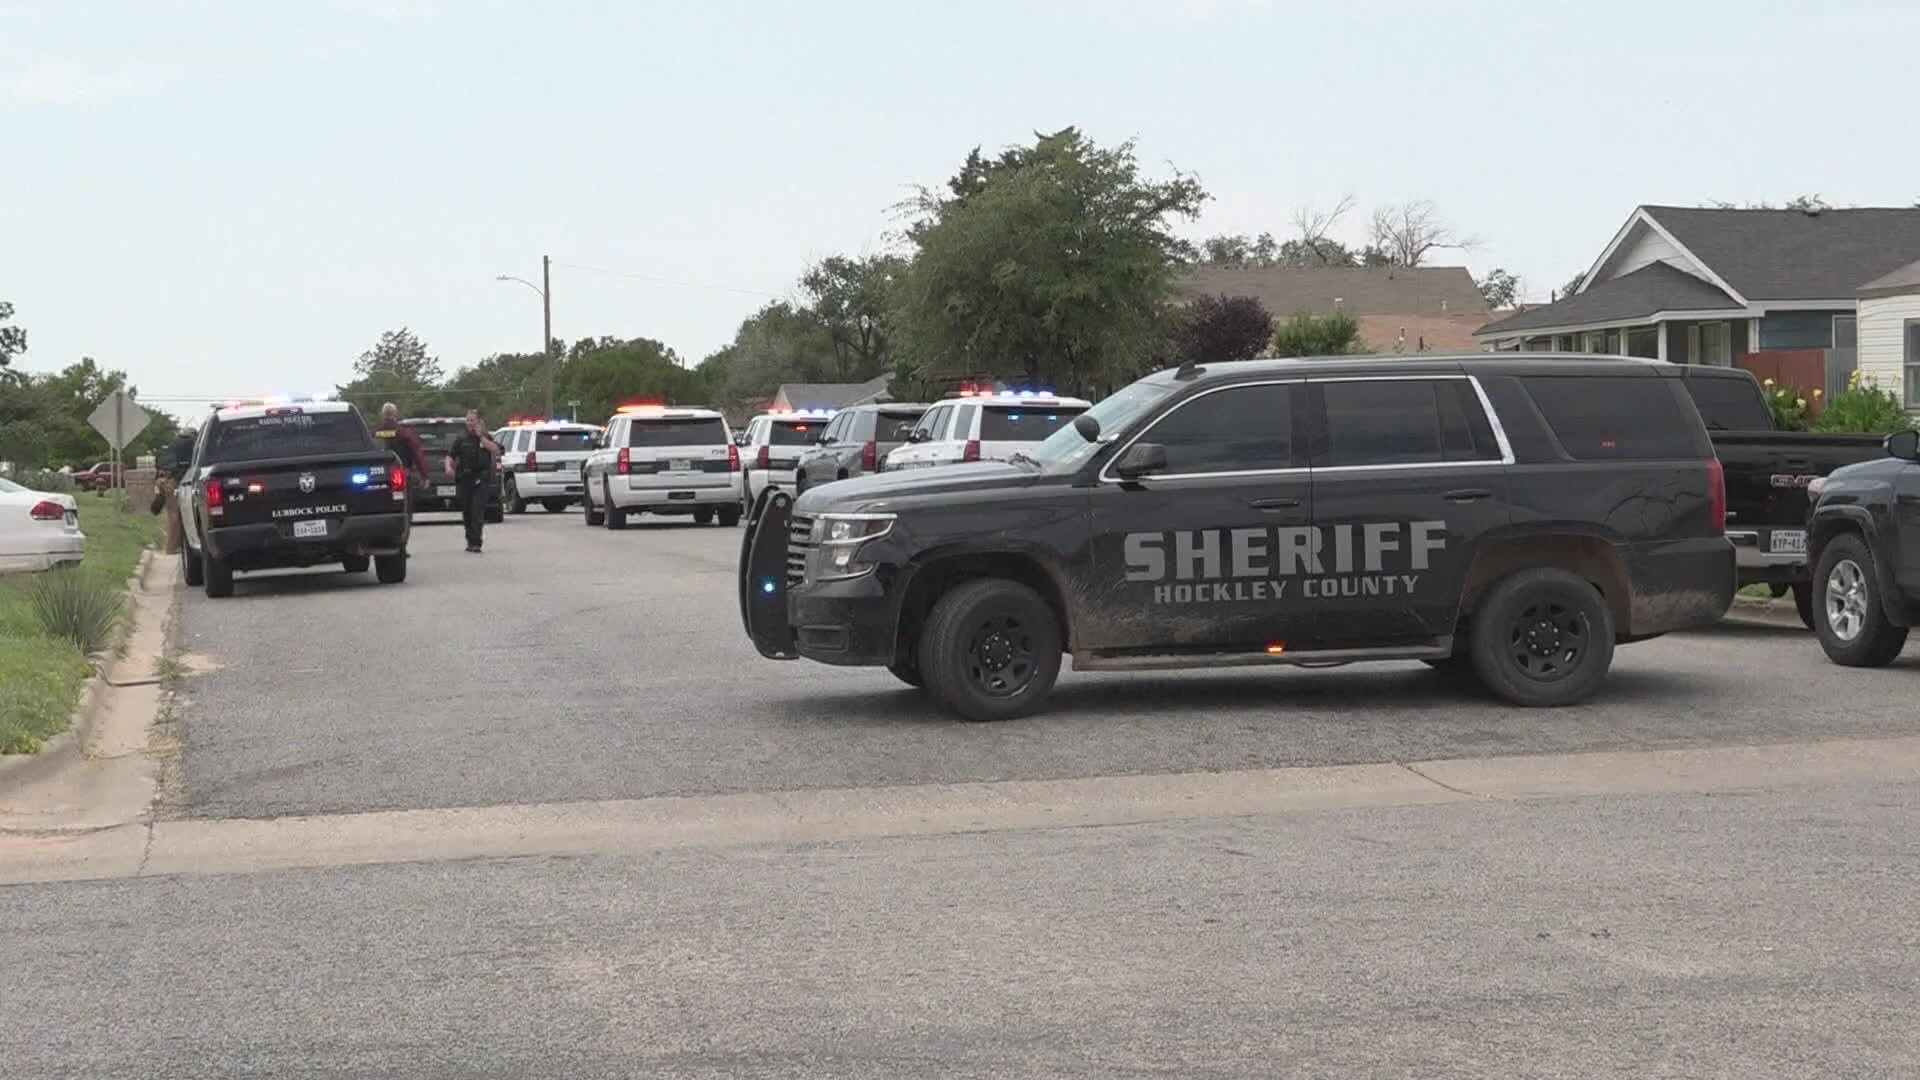 The Levelland police chief says it all started with a traffic stop earlier in the day.